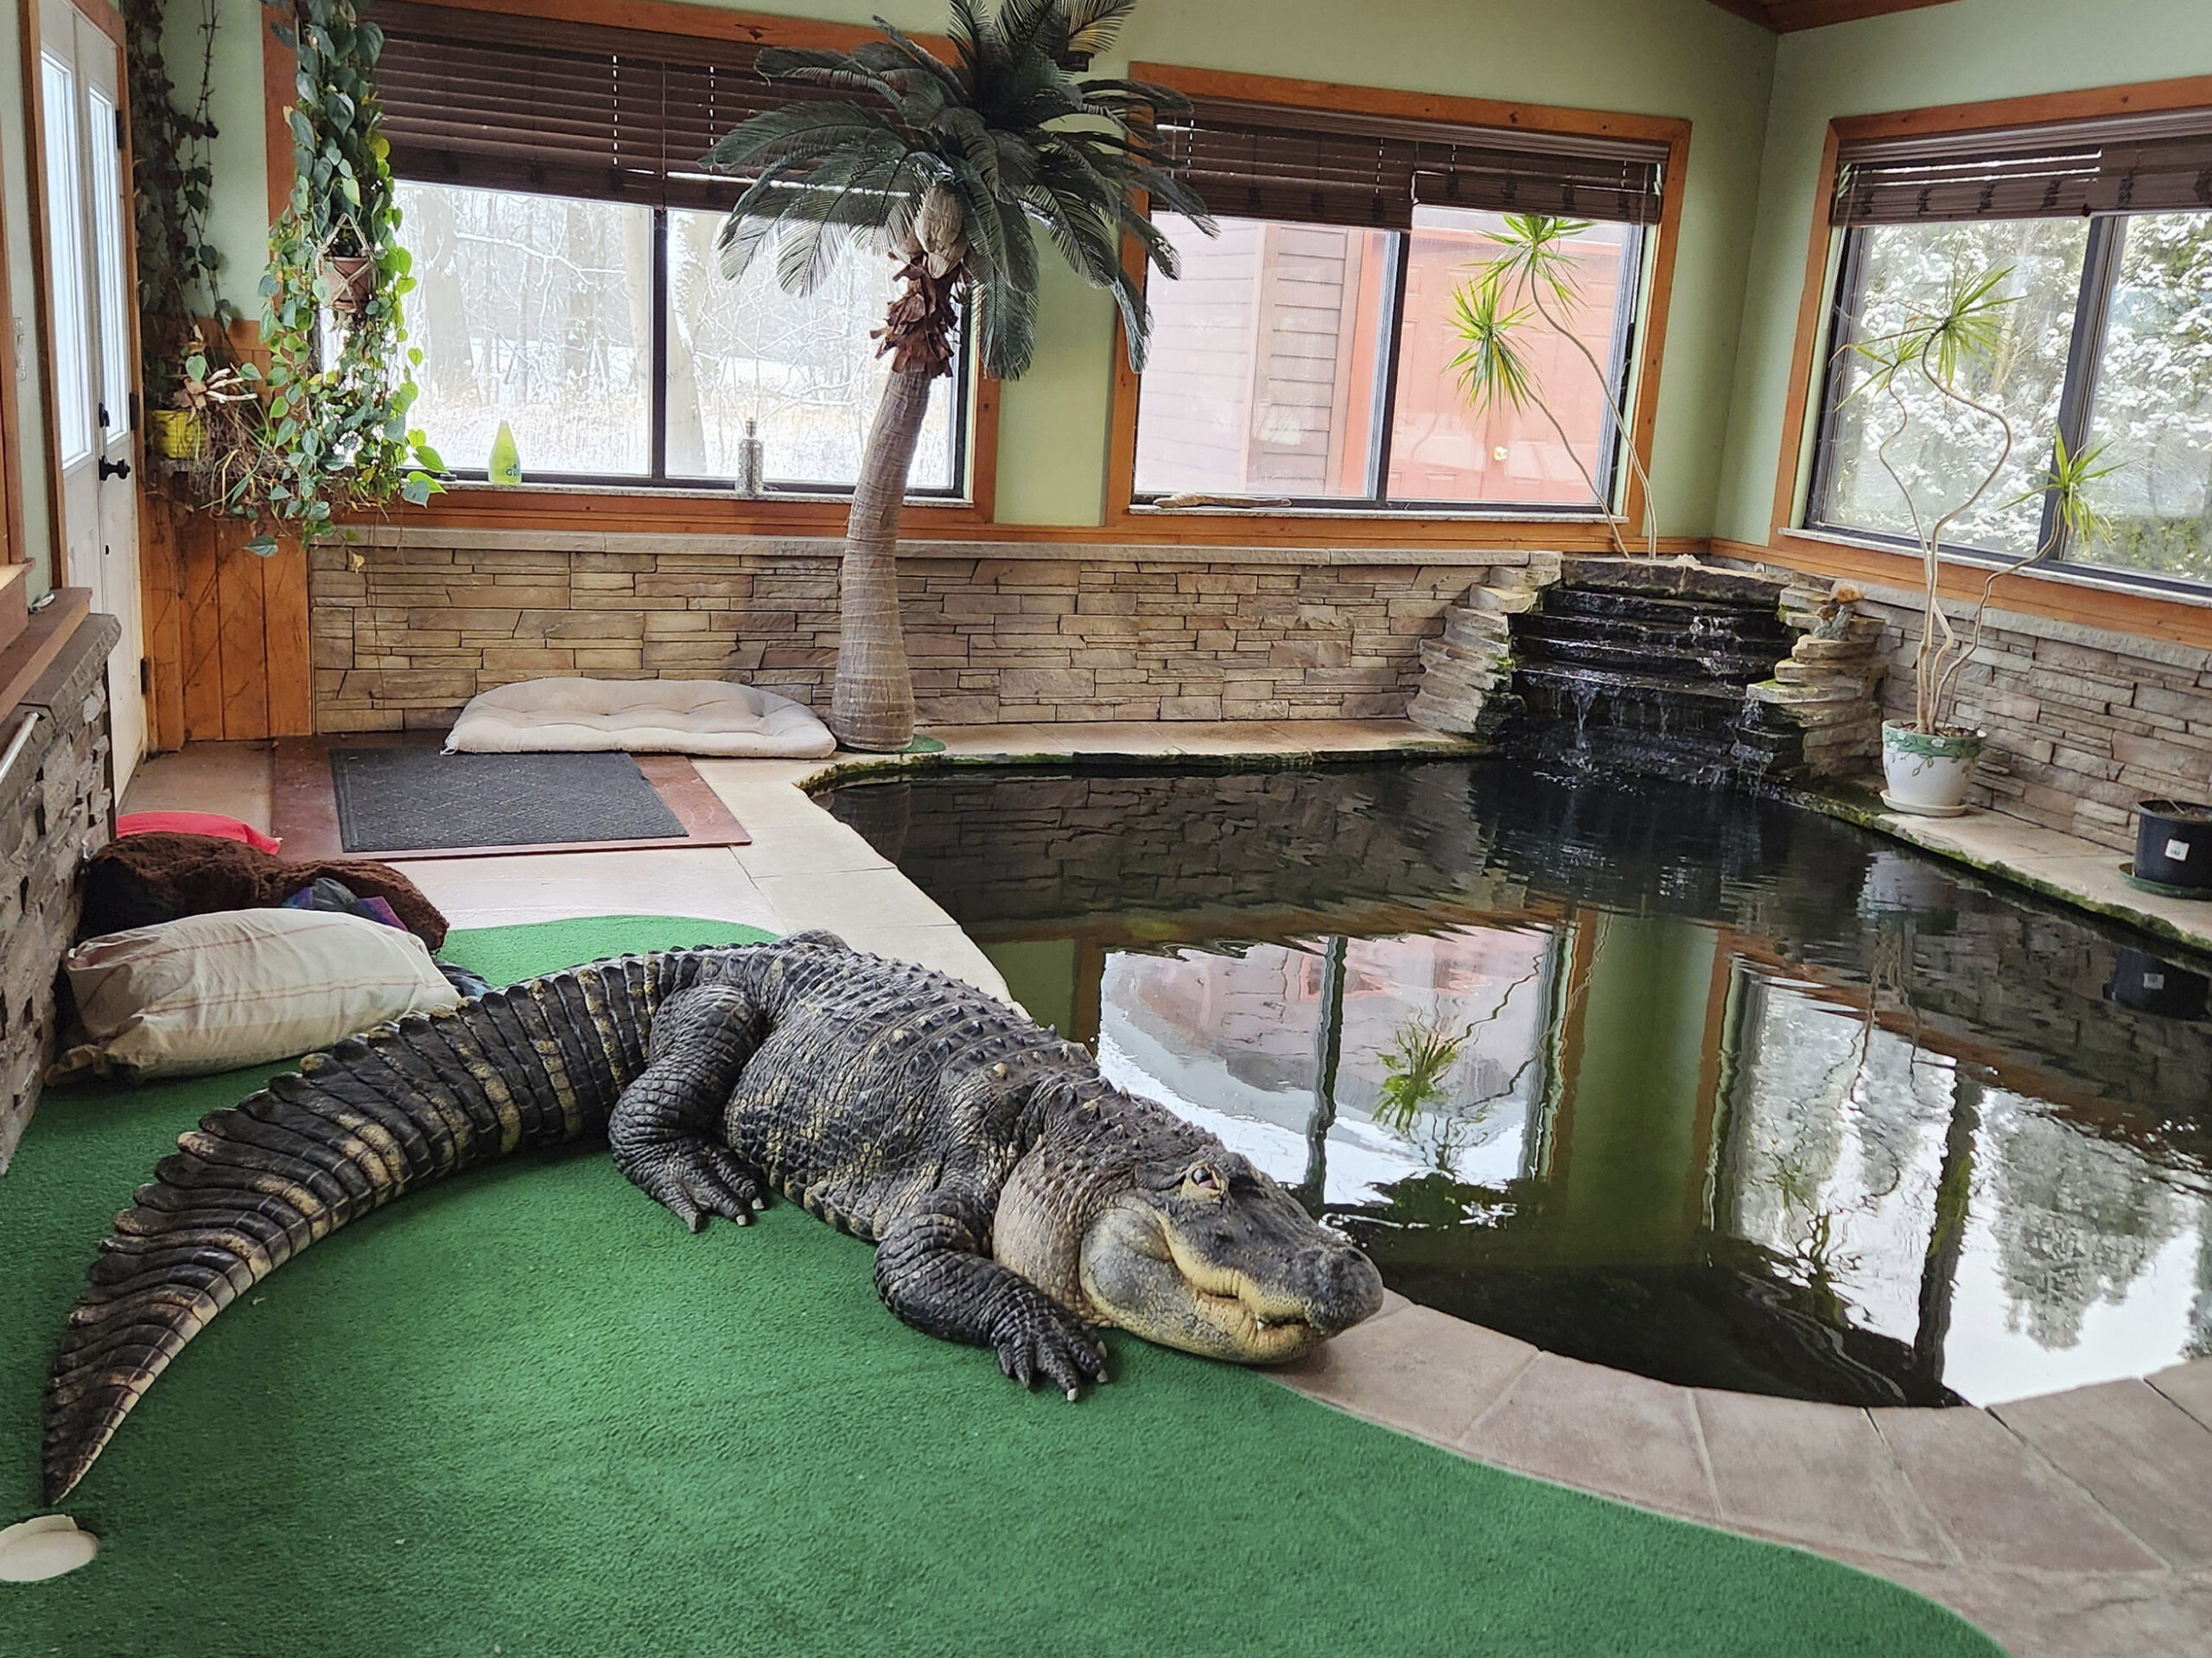 A New York man’s pet alligator was seized after 30 years. Now, he wants Albert back